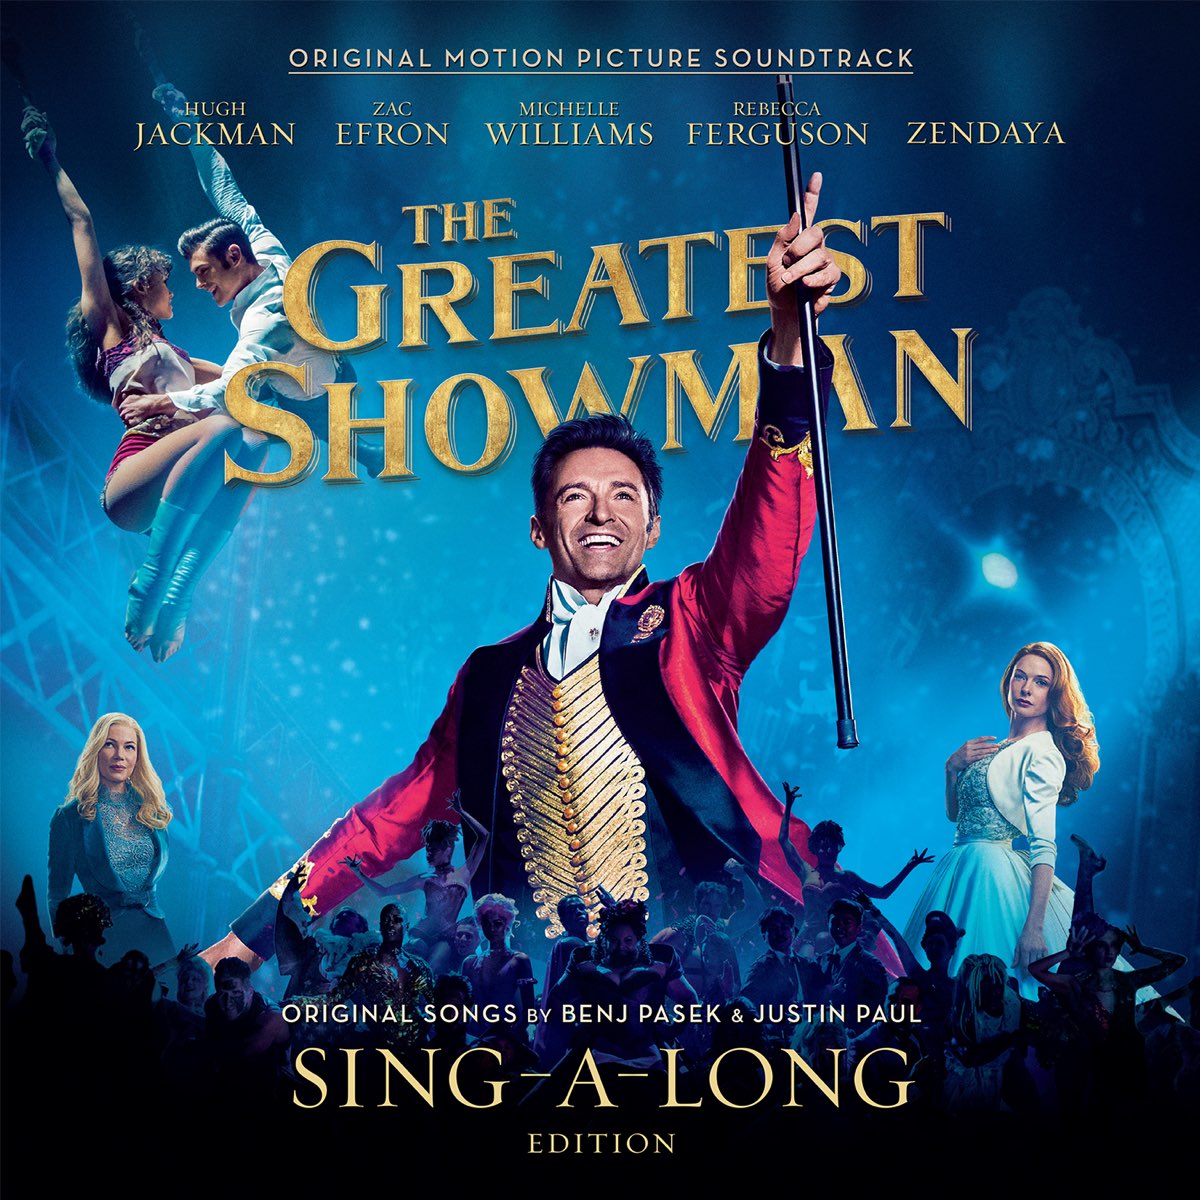 ‎The Greatest Showman (Original Motion Picture Soundtrack) [Sing-A-Long ...